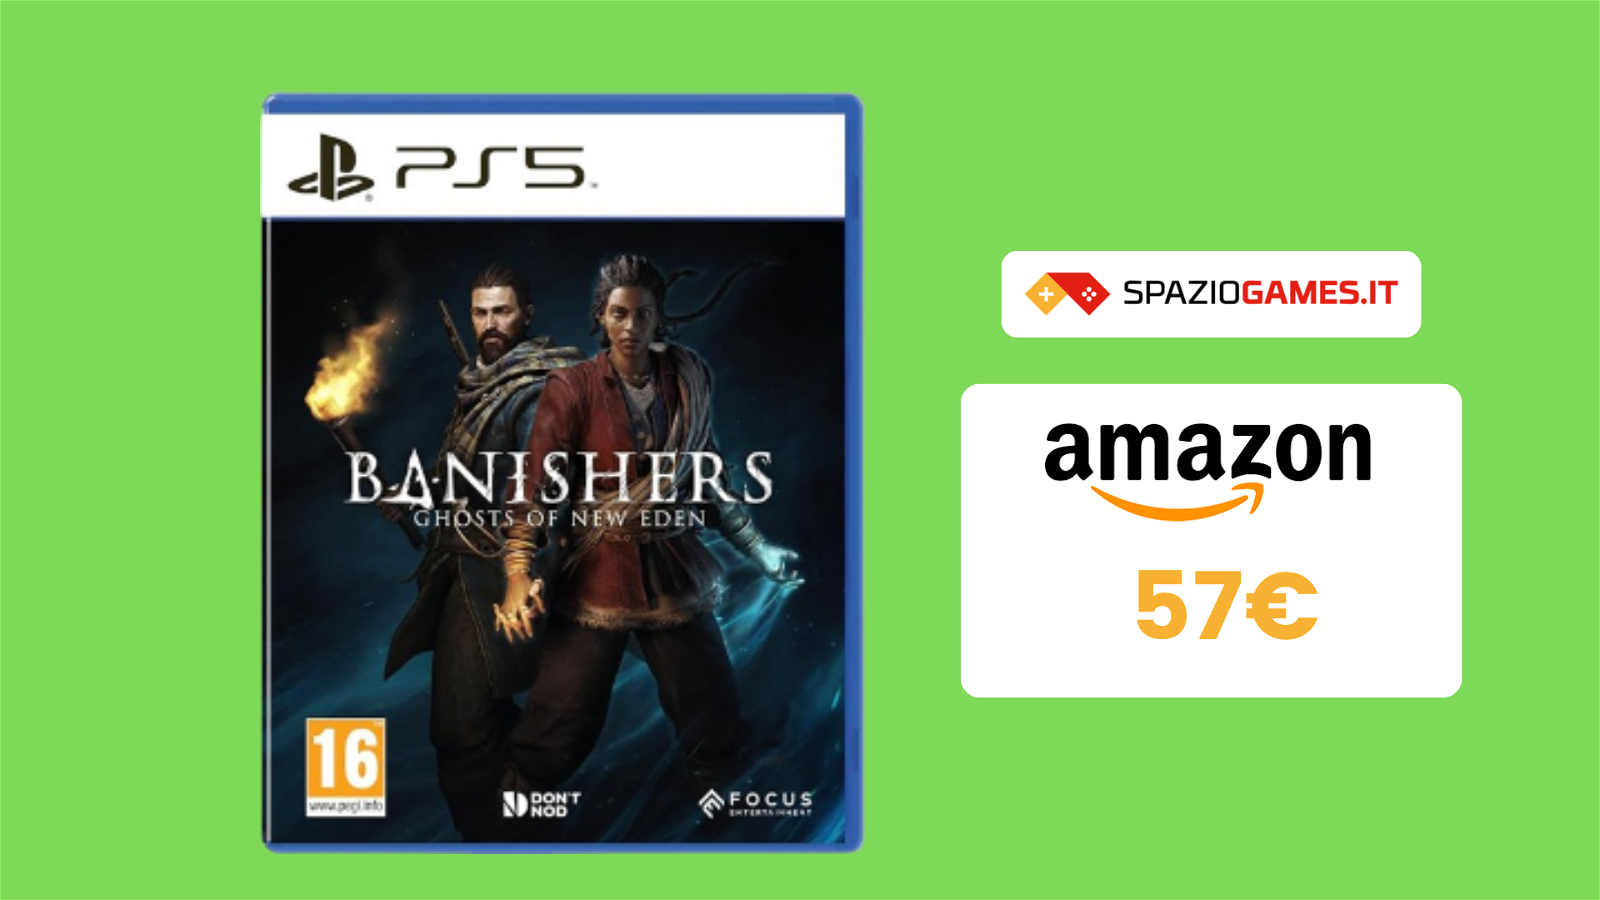 Banishers: Ghosts of New Eden per PS5 a soli 57€!